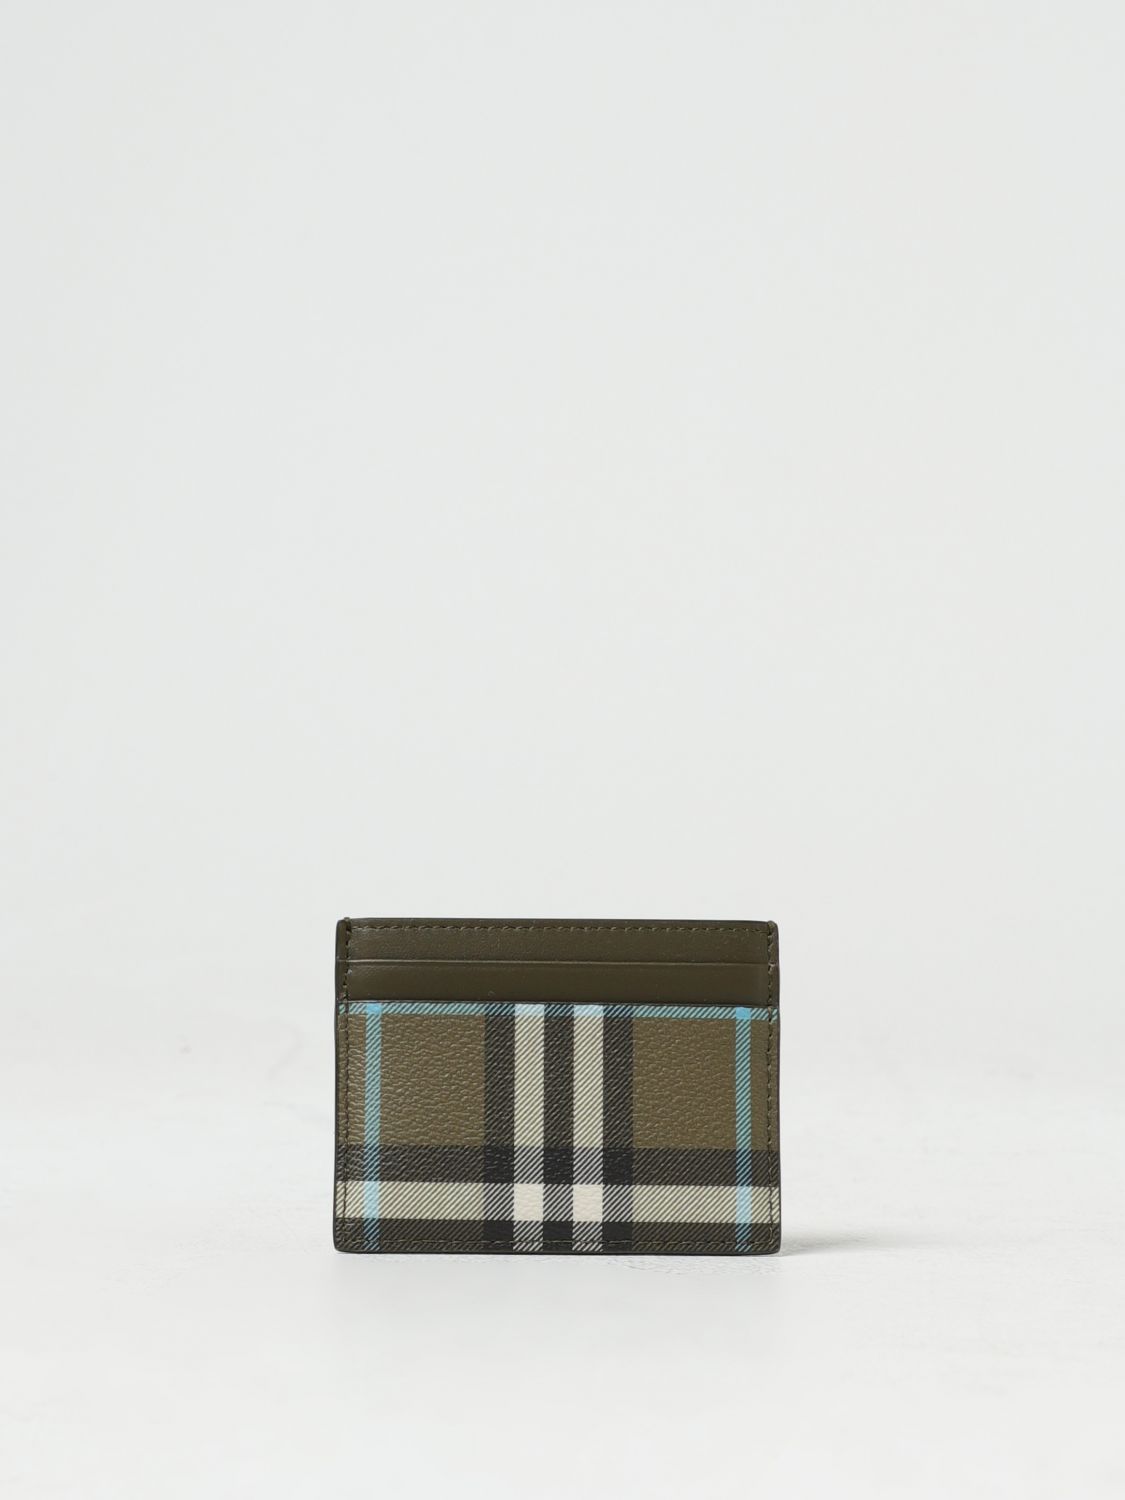 Burberry credit card holder in coated cotton and leather